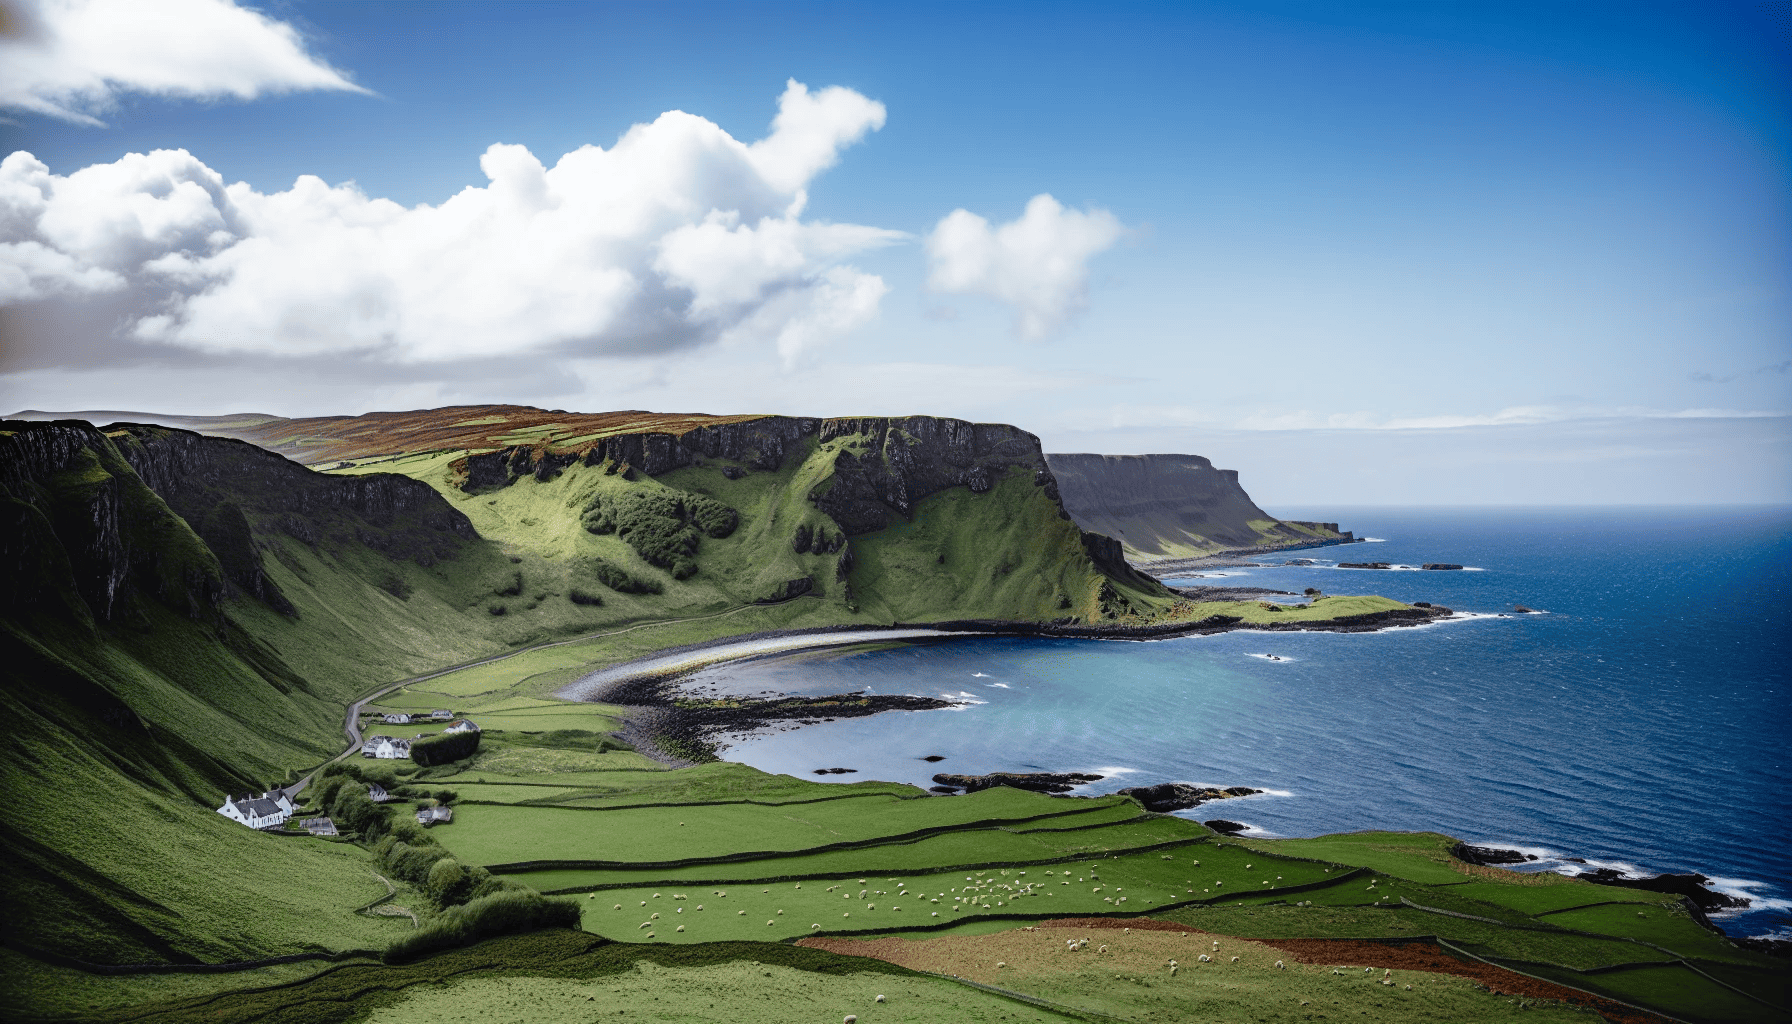 Scenic view of the Causeway Coastal Route winding through the Glens of Antrim